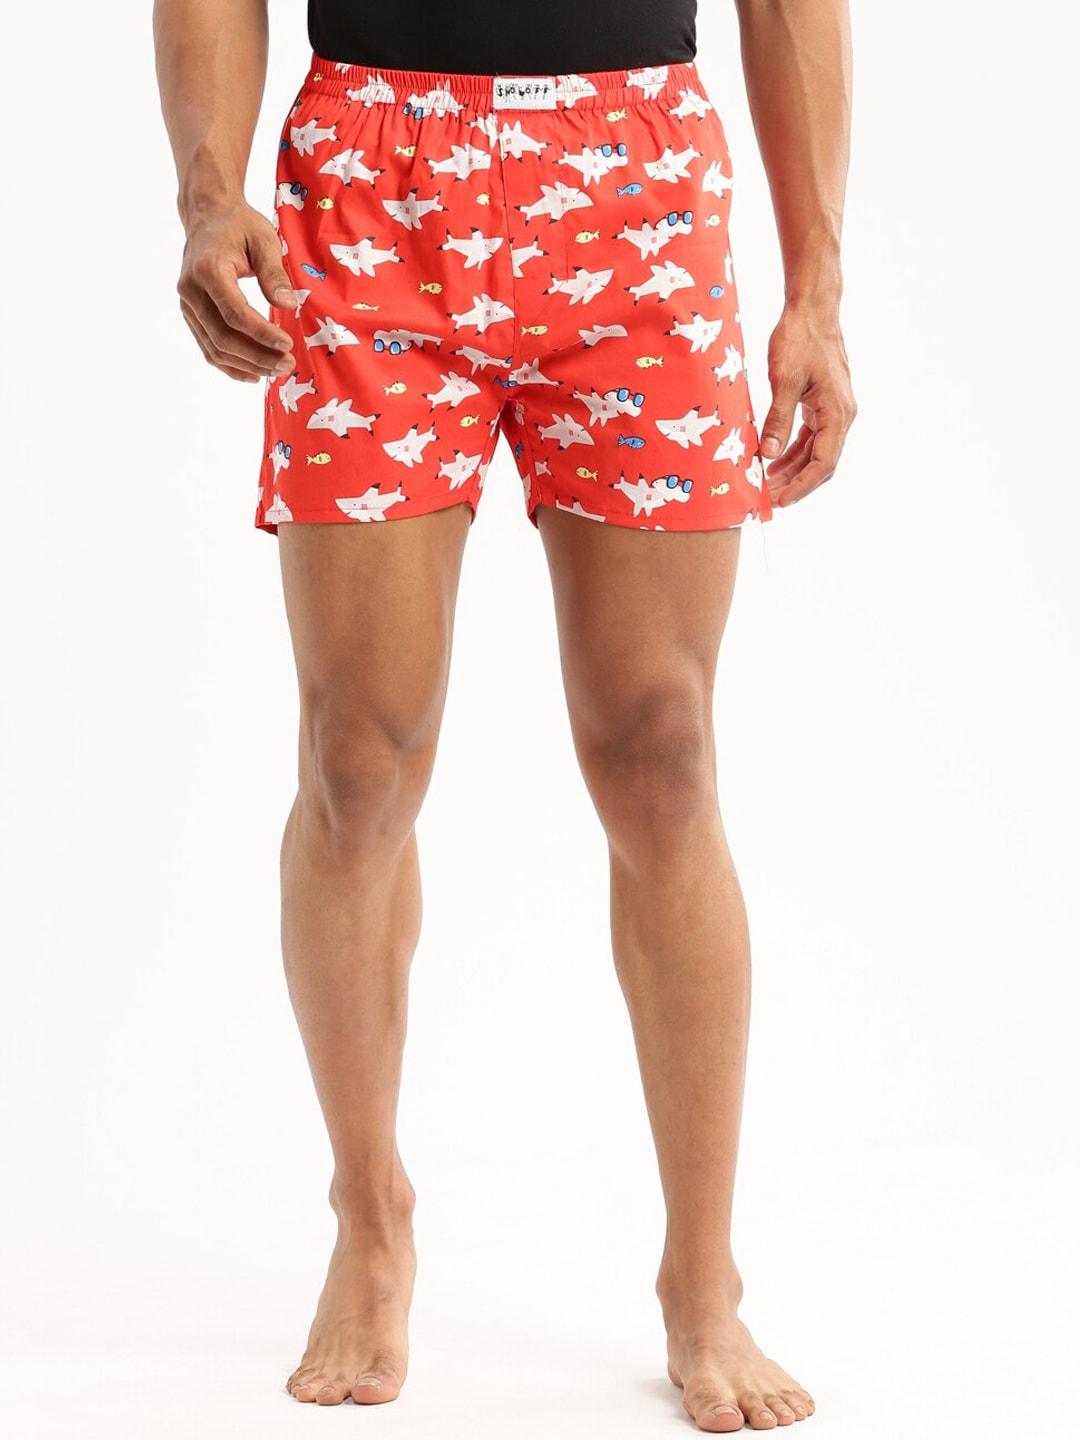 showoff-slim-fit-conversational-printed-cotton-boxer-am-126-9_red